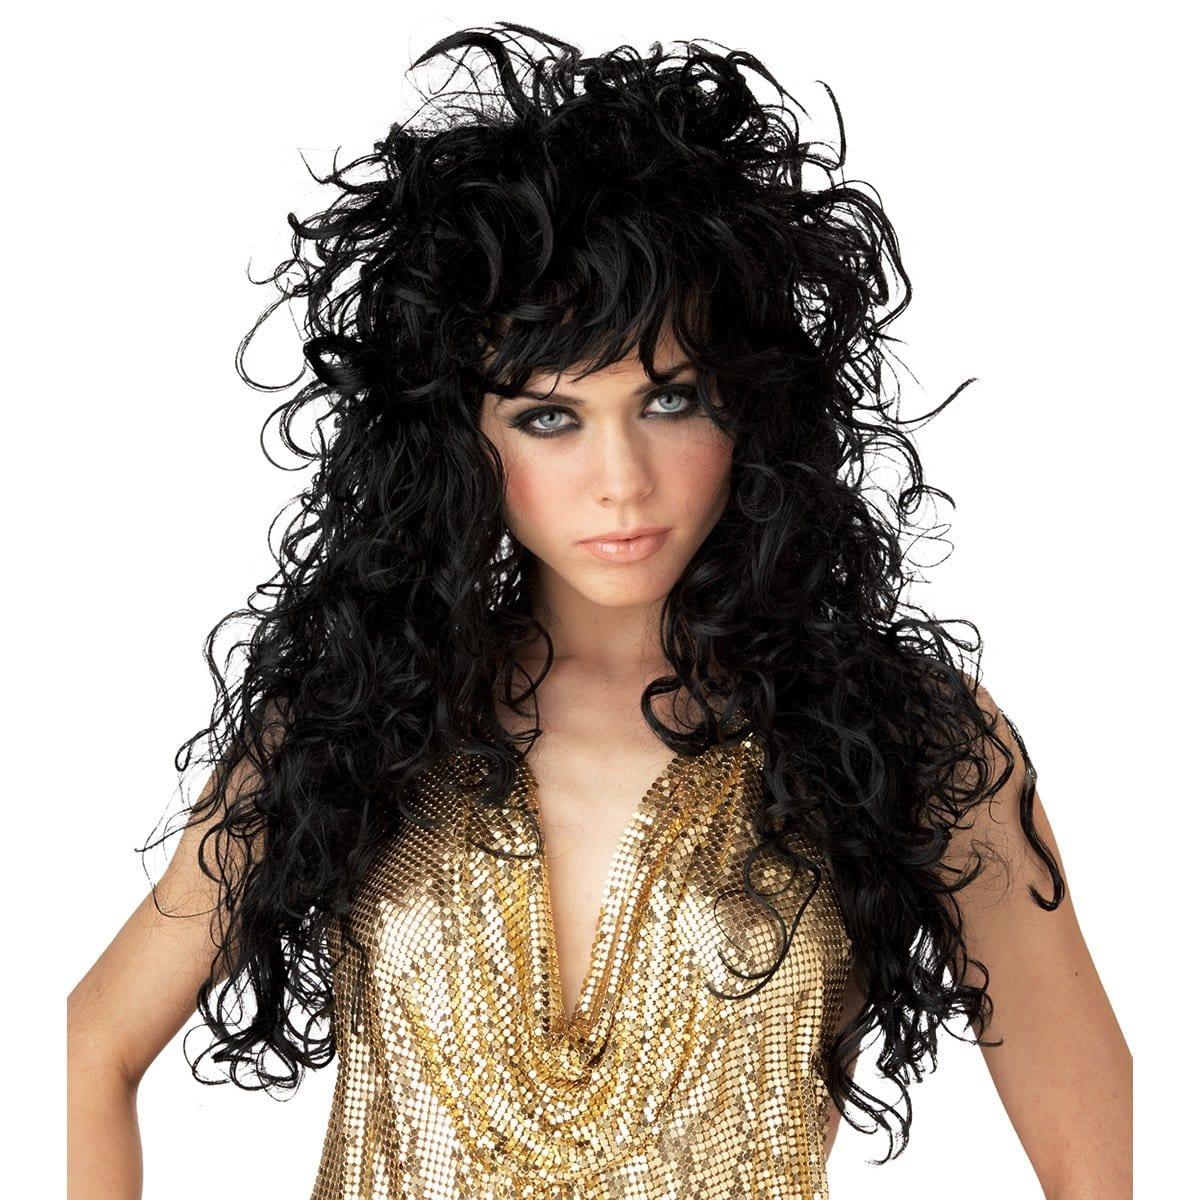 Buy Costume Accessories Black seduction wig for women sold at Party Expert